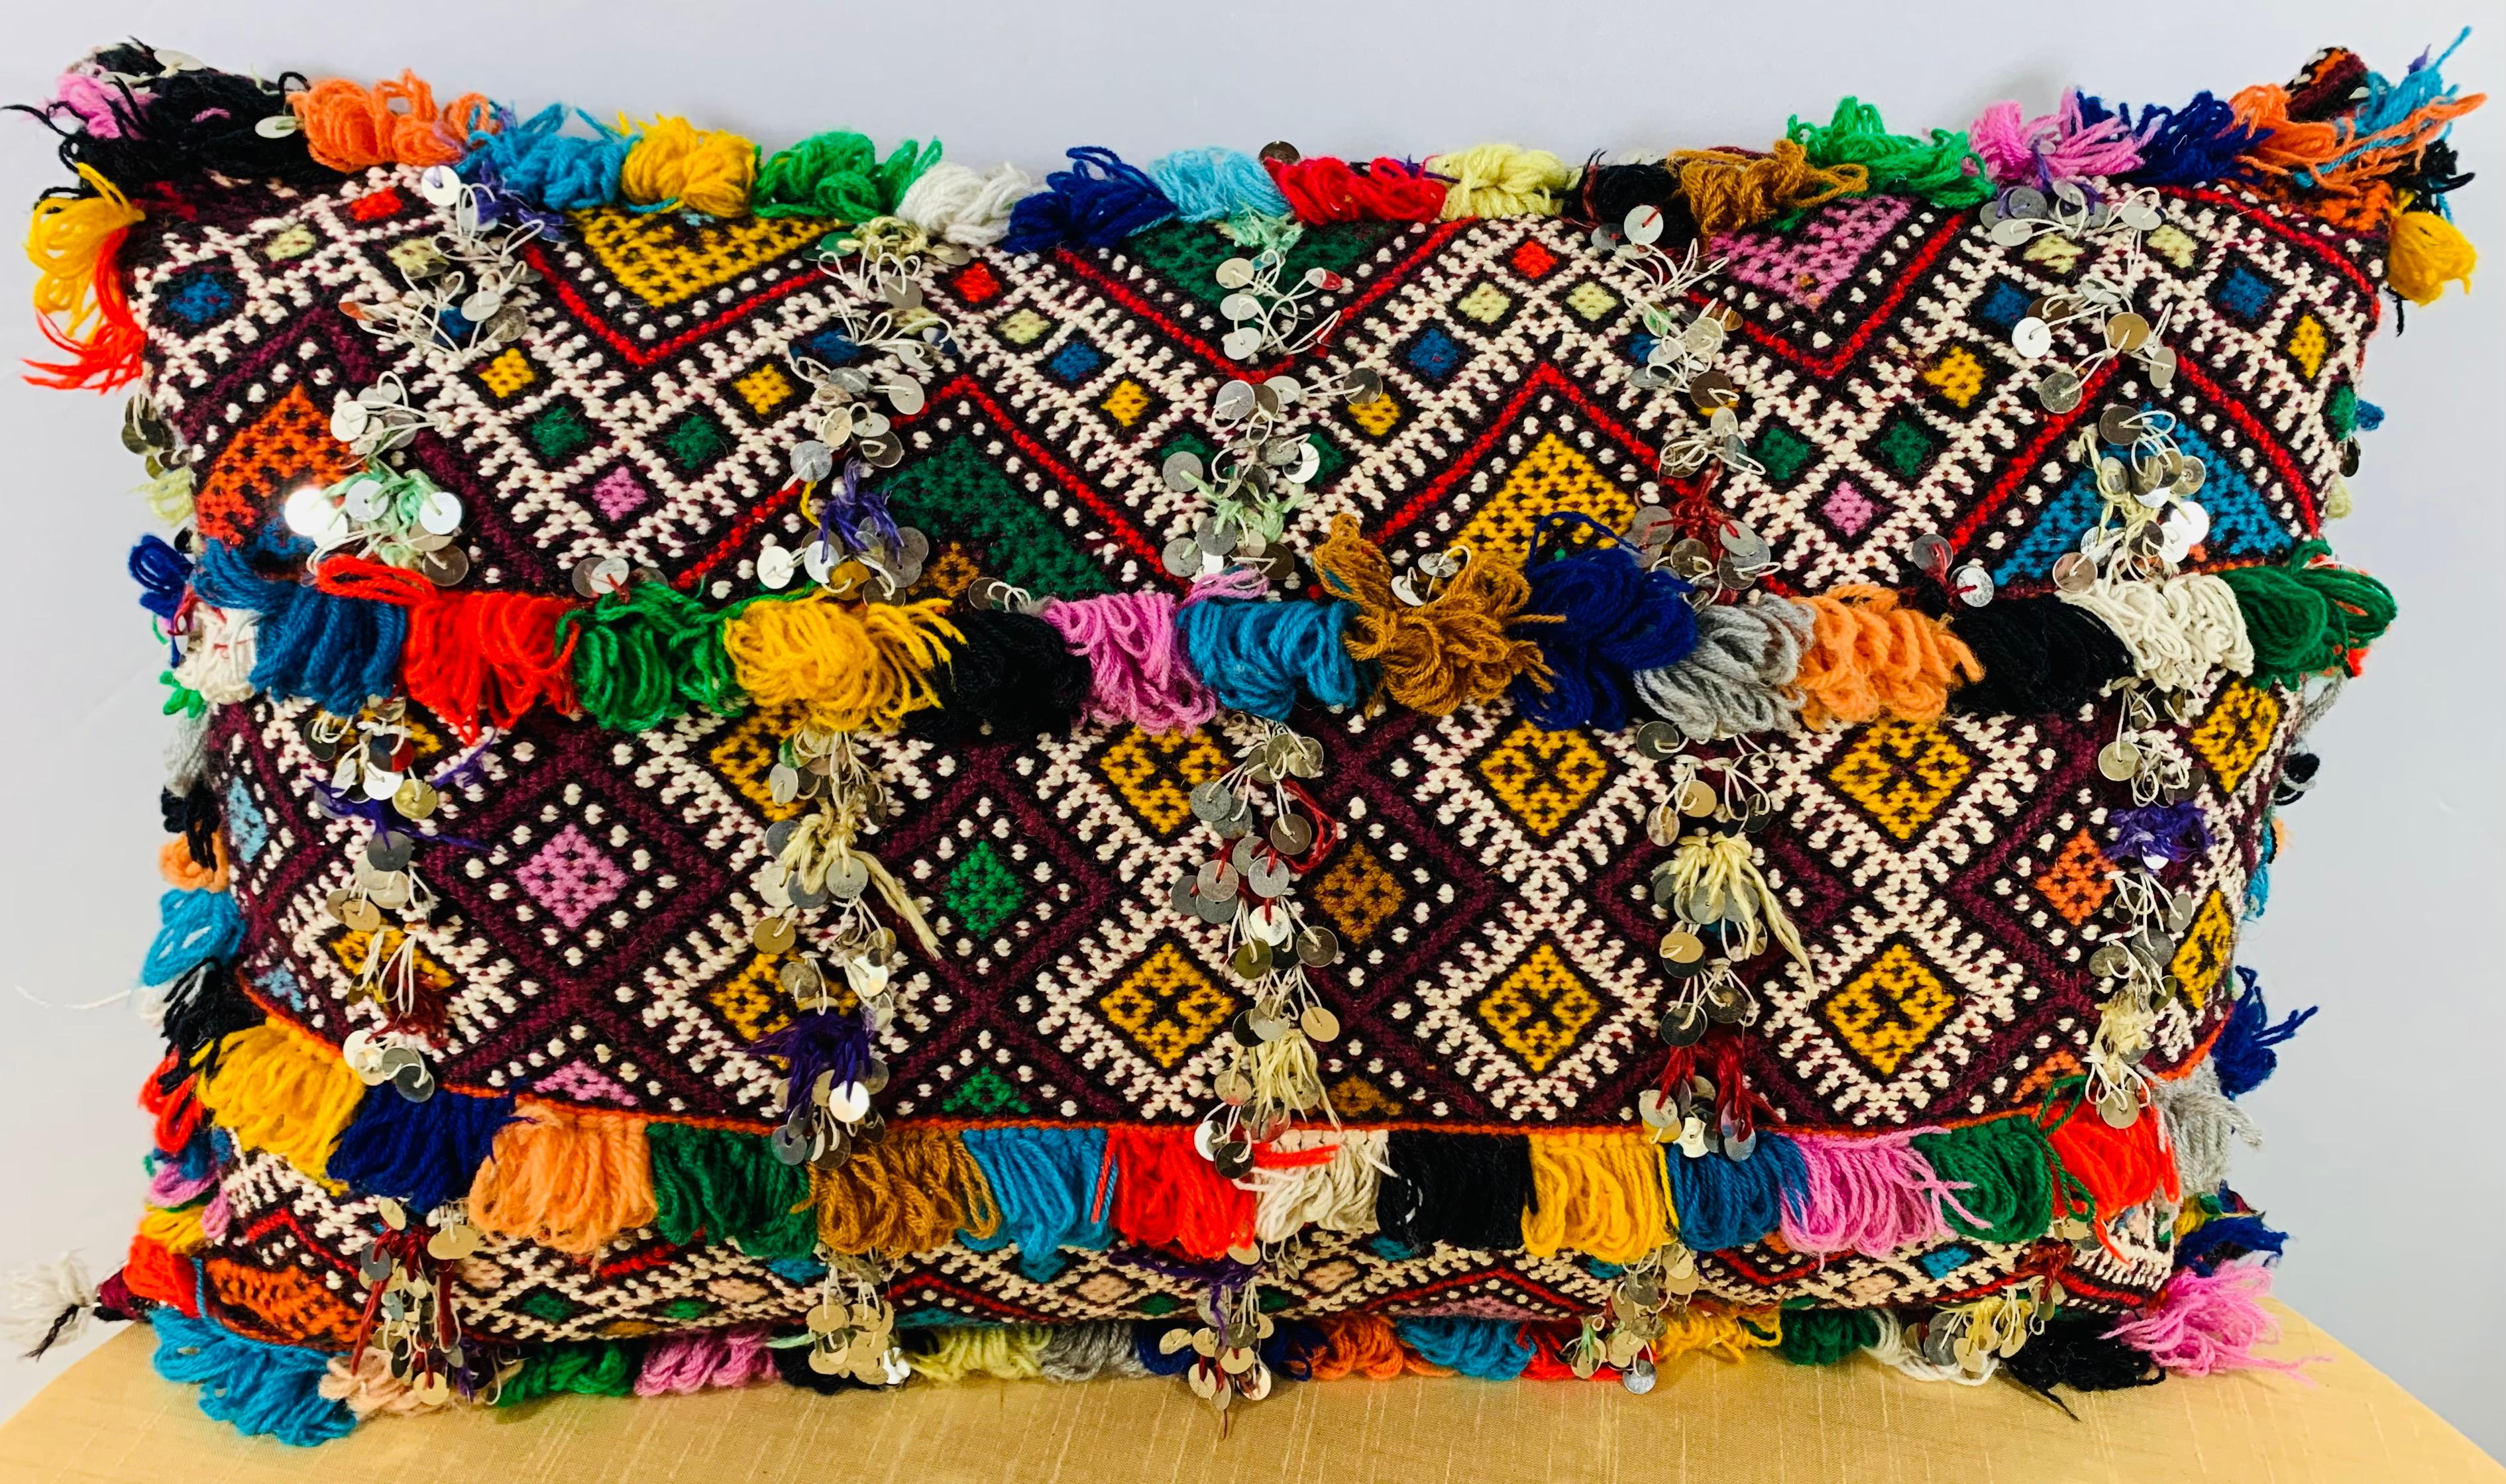 Handwoven by Berber women using high-quality wool
Made using vintage fabrics and featuring unique color schemes
Boasts magnificent Berber geometrical patterns and lovely fringe work

Size: 24.5